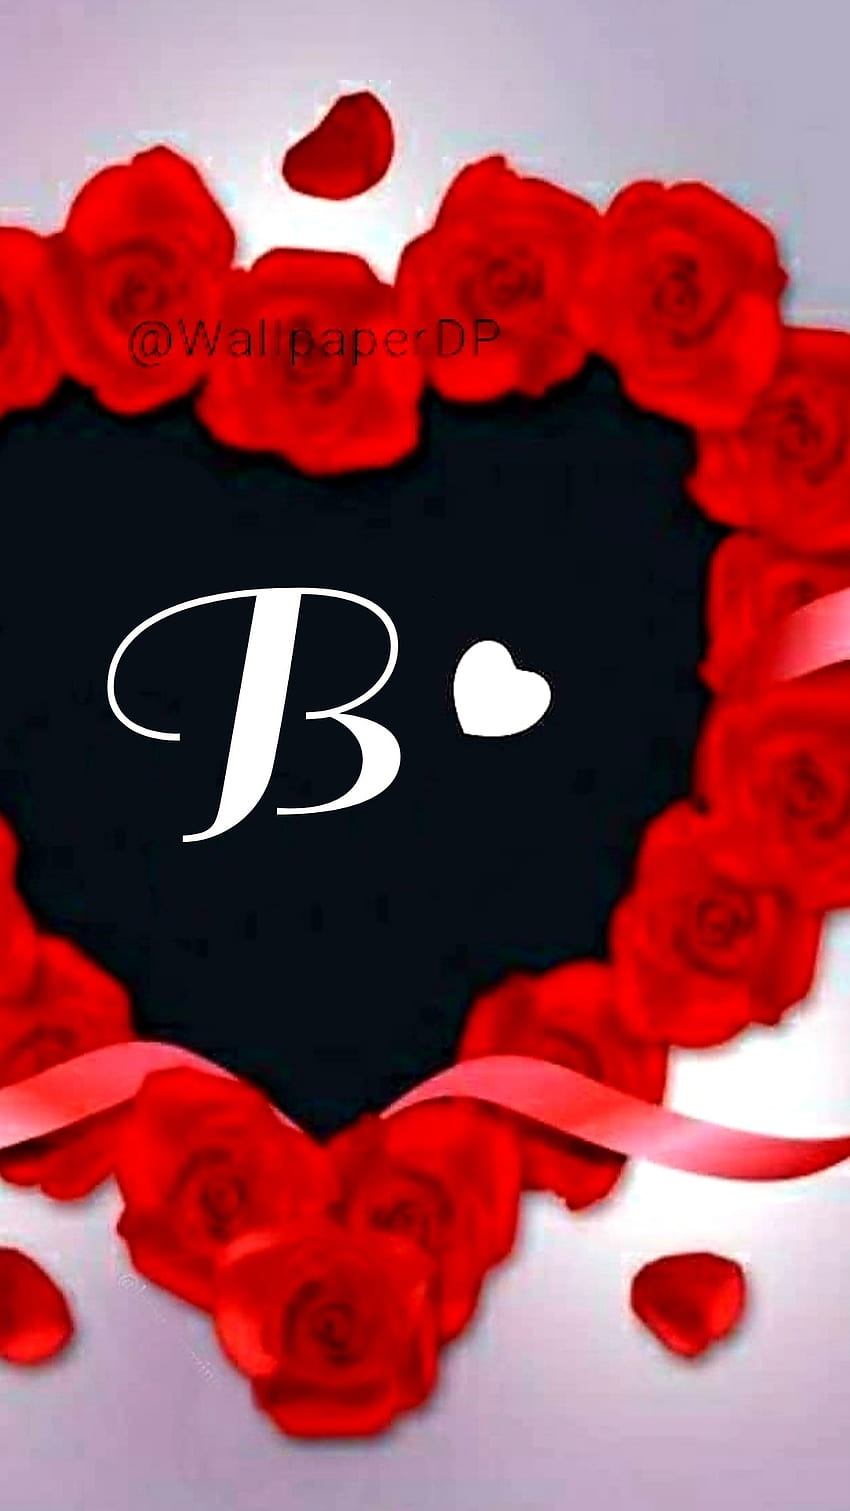 Letter b Images and Stock Photos. 49,269 Letter b photography and royalty  free pictures available to download from thousands of stock photo providers.